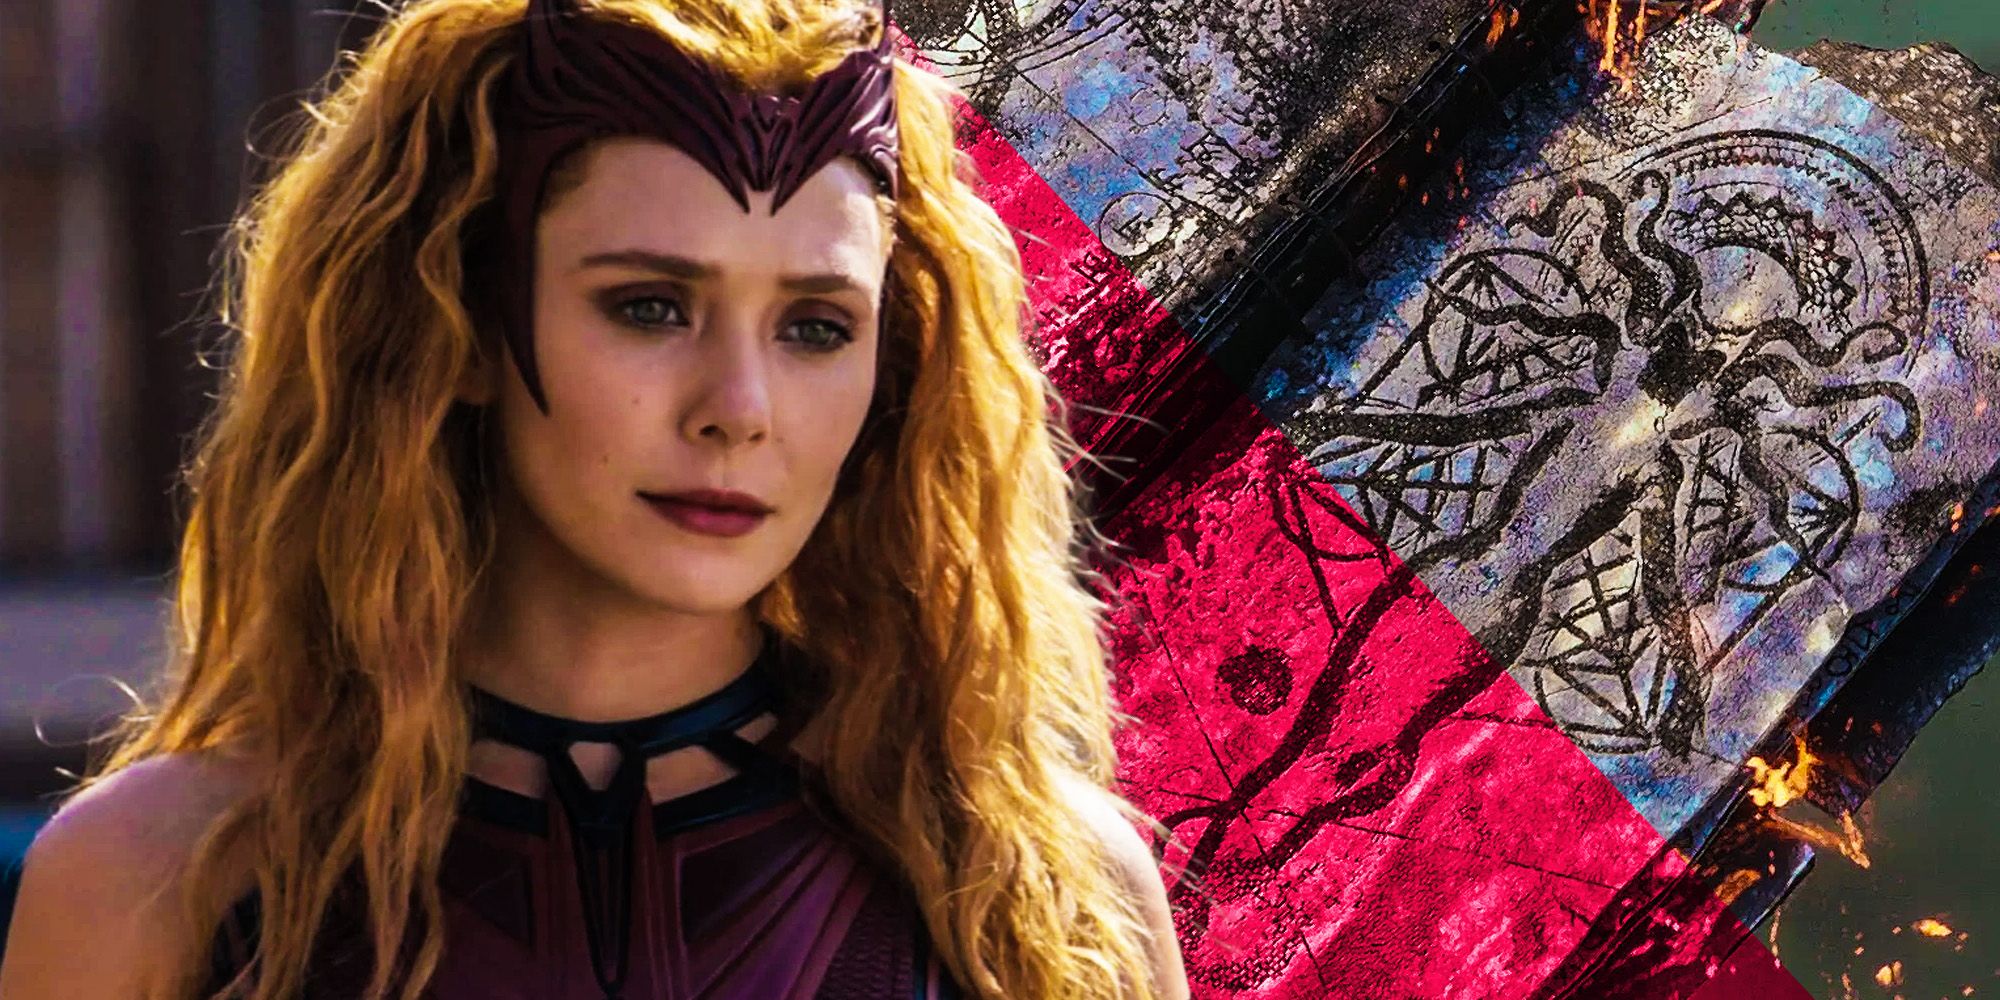 Did Wanda Destroy The Darkhold In Every Universe?